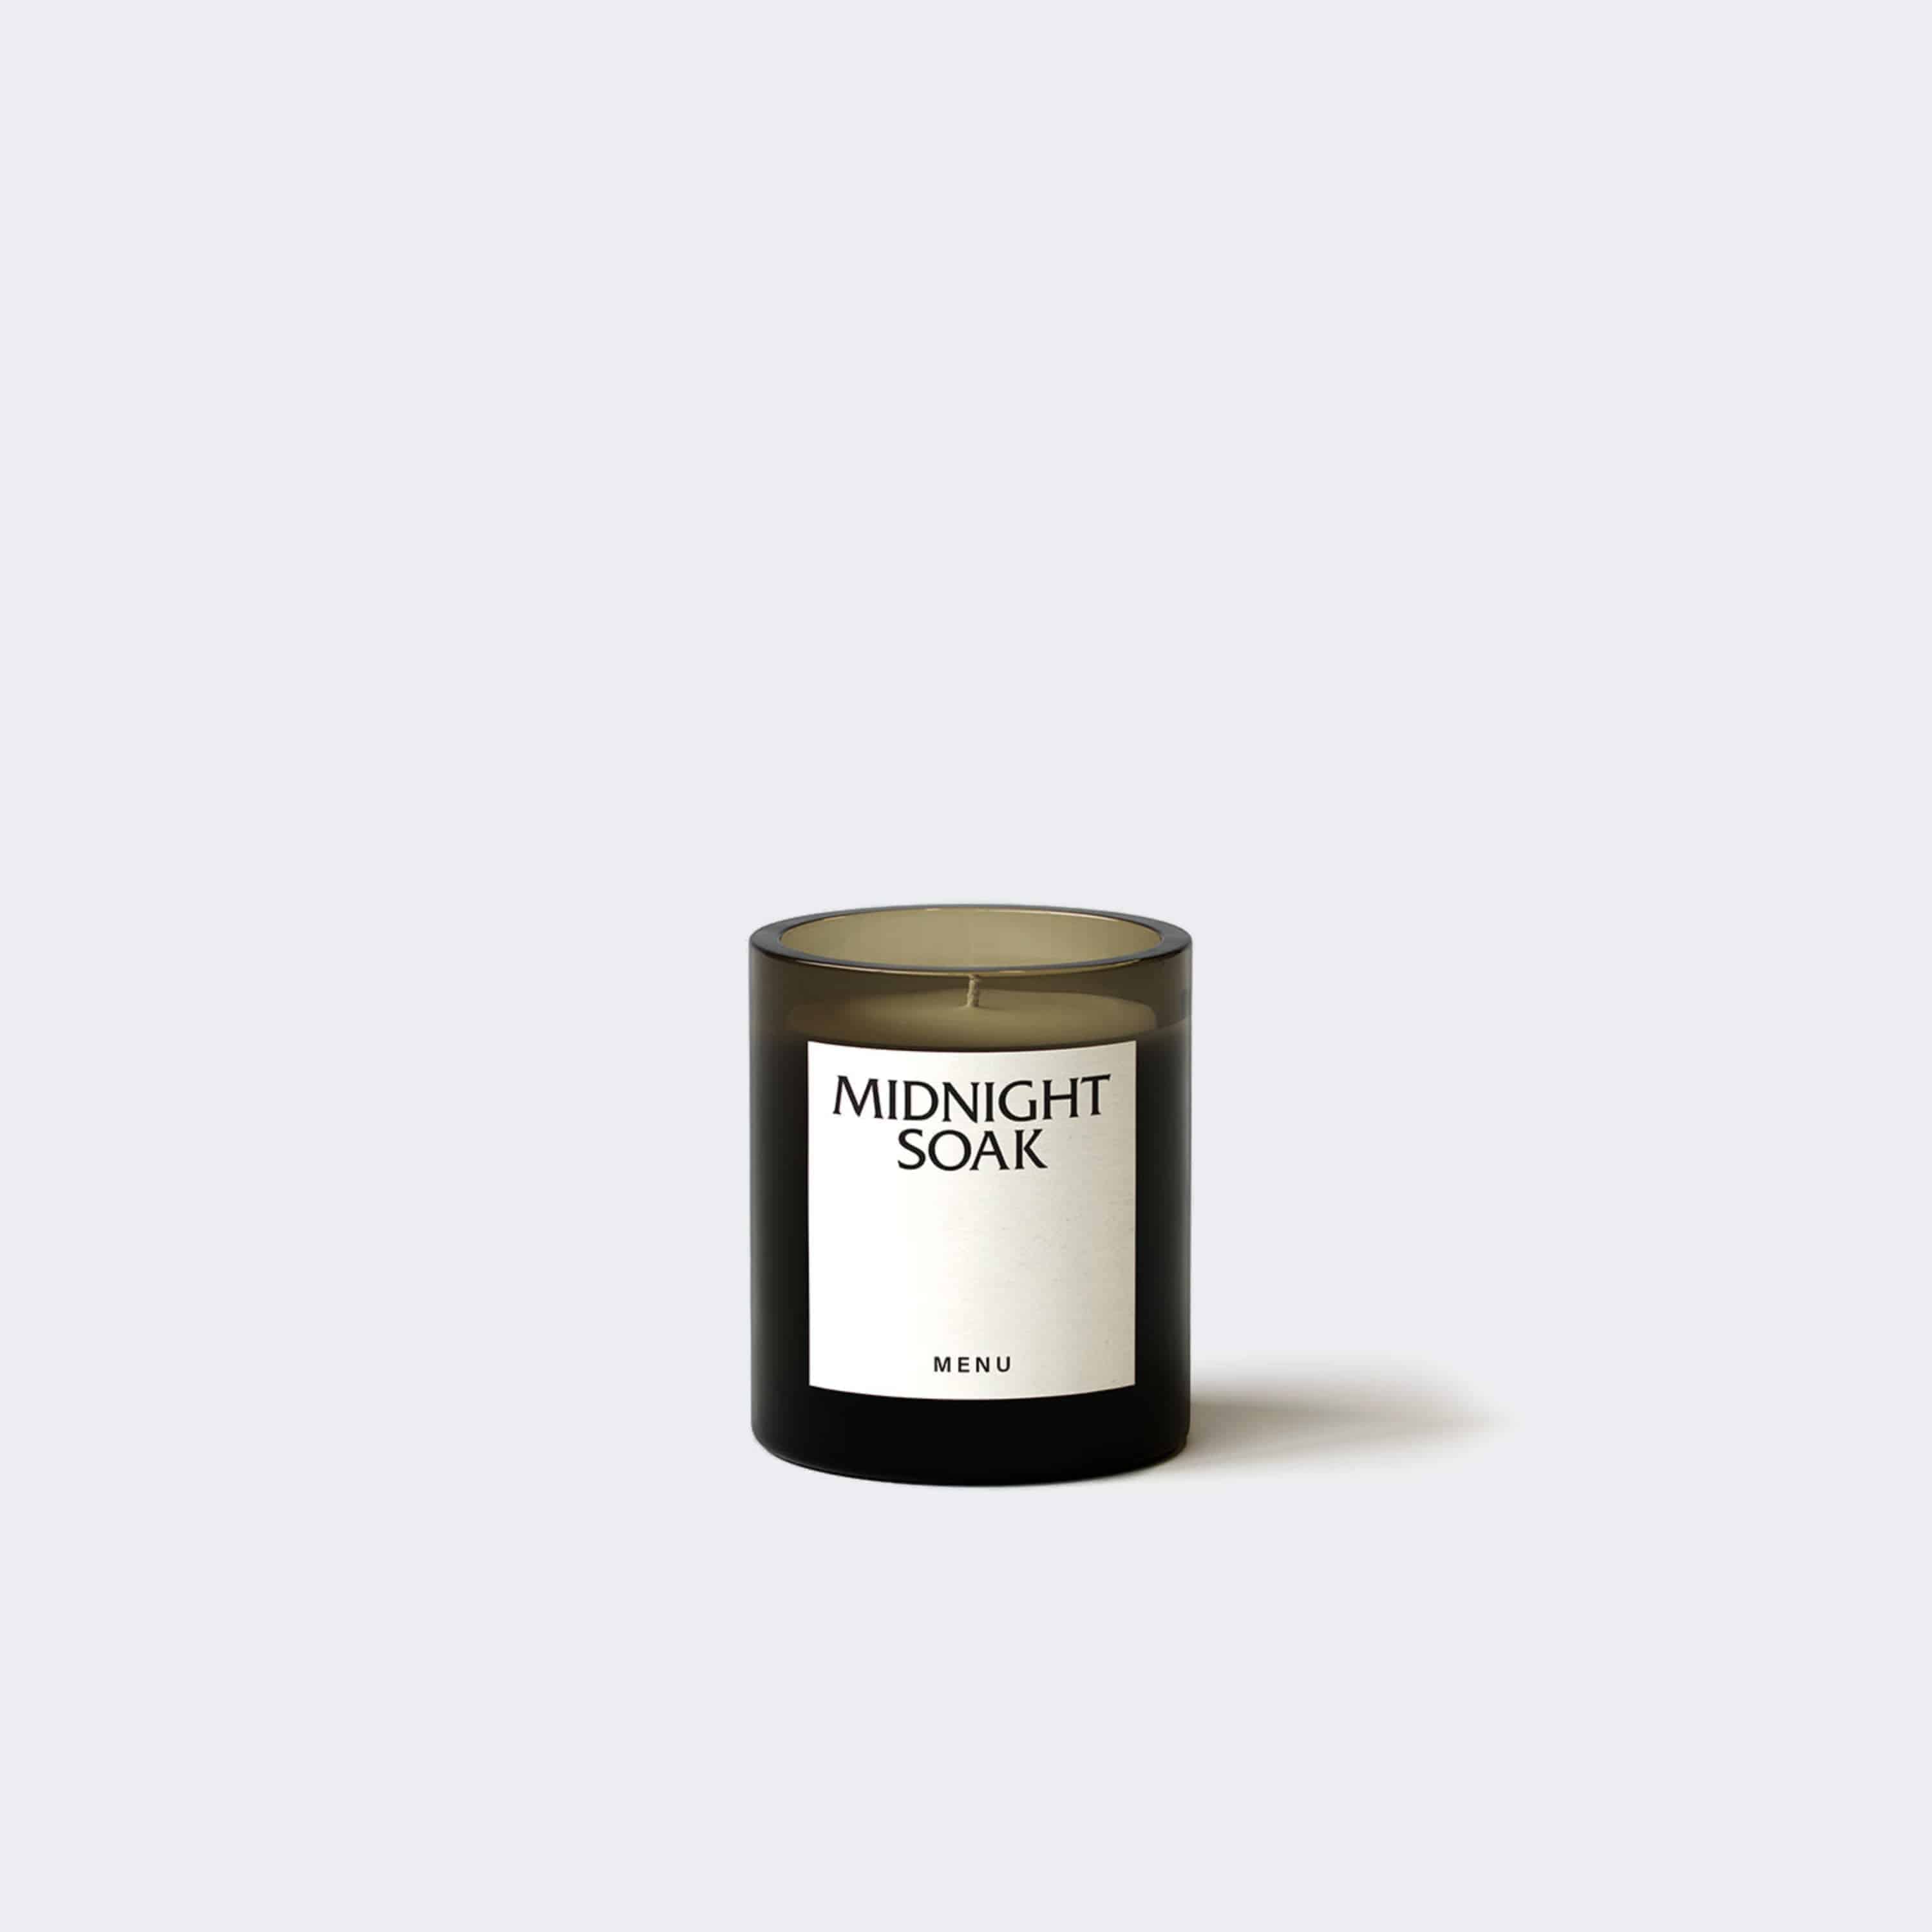 Audo Copenhagen Olfacte Scented Candle, Midnight Soak Poured Glass Candle, 8.3 oz. - KANSO#Select Size_Poured Glass Candle, 8.3 oz.